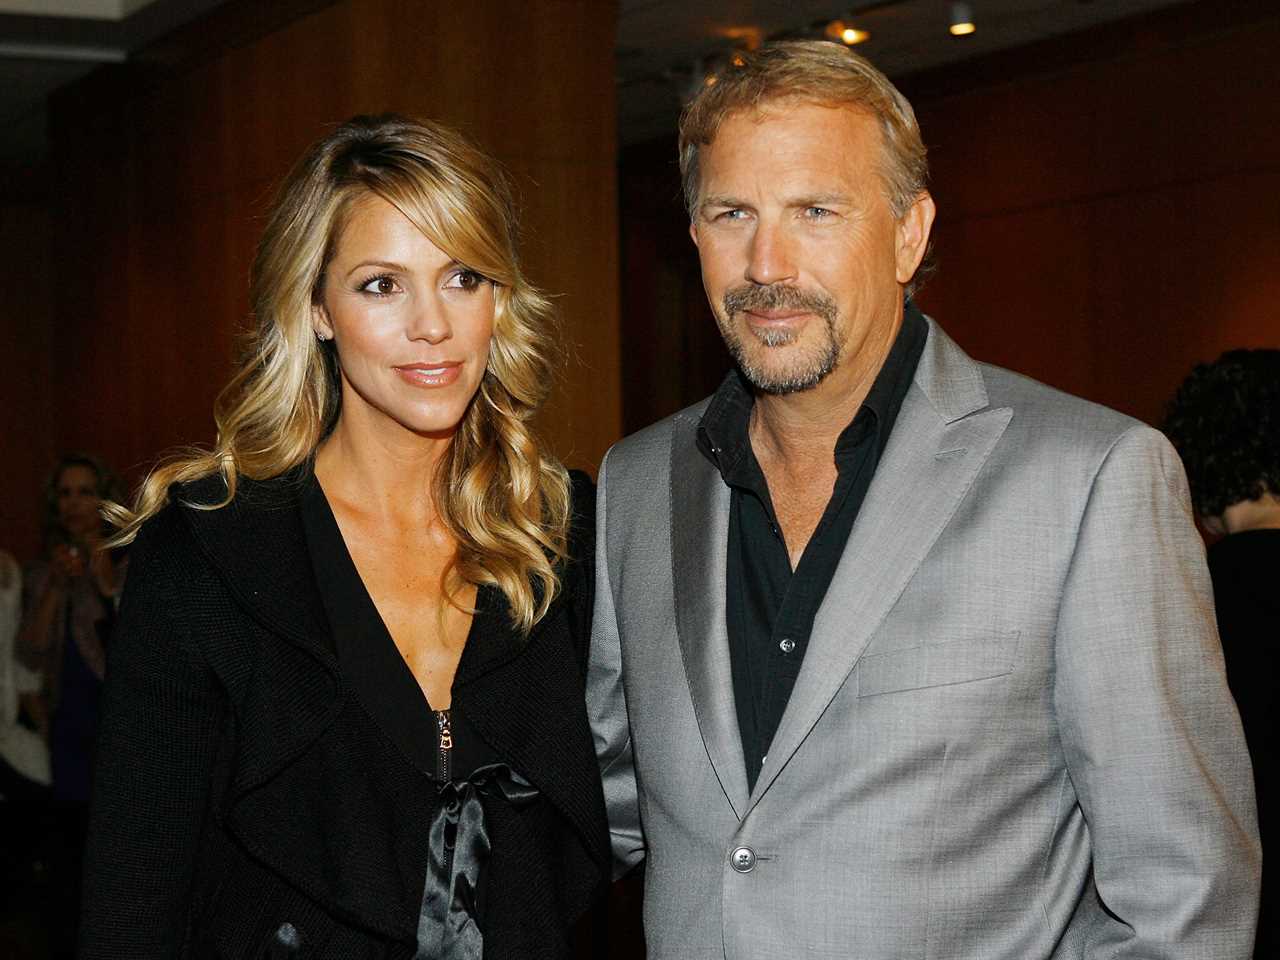 Kevin Costner (R) and his wife, Christine Baumgartner attend the 20th Anniversary Screening of "Field Of Dreams" held at the Academy of Motion Picture Arts and Sciences on December 16, 2009 in Beverly Hills, California.